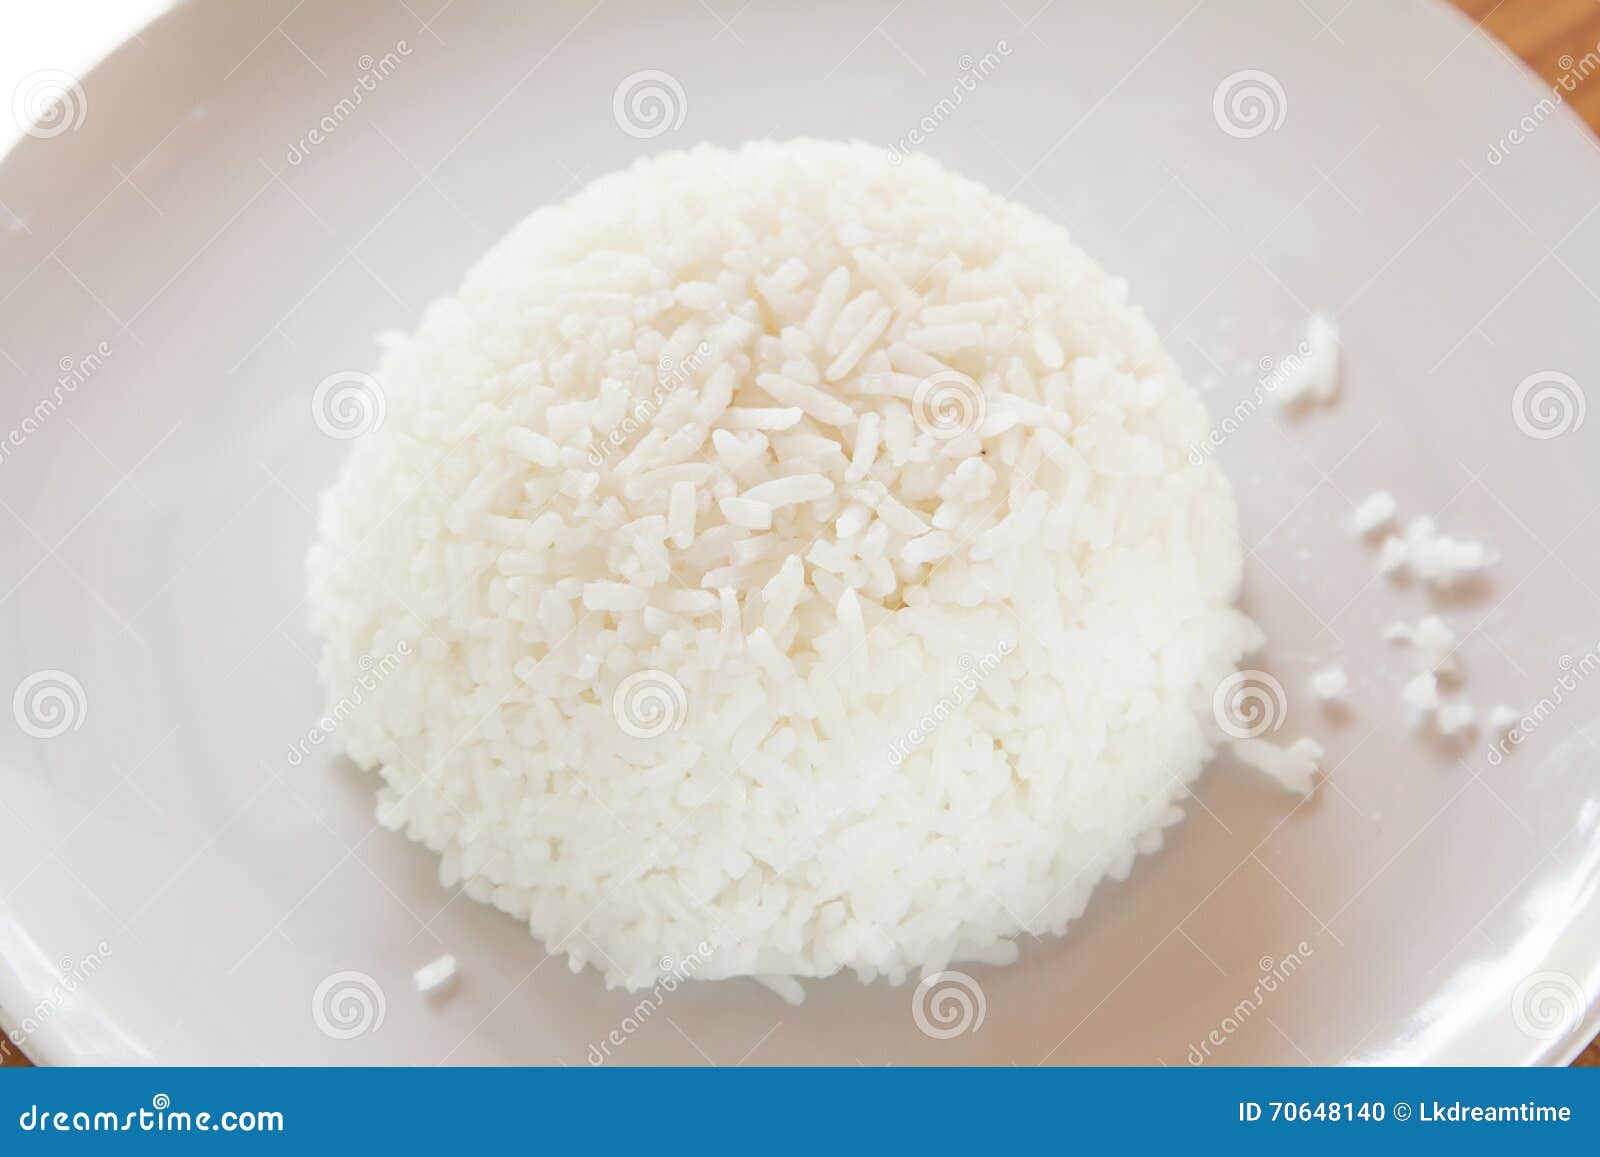 steamed rice on white plate.